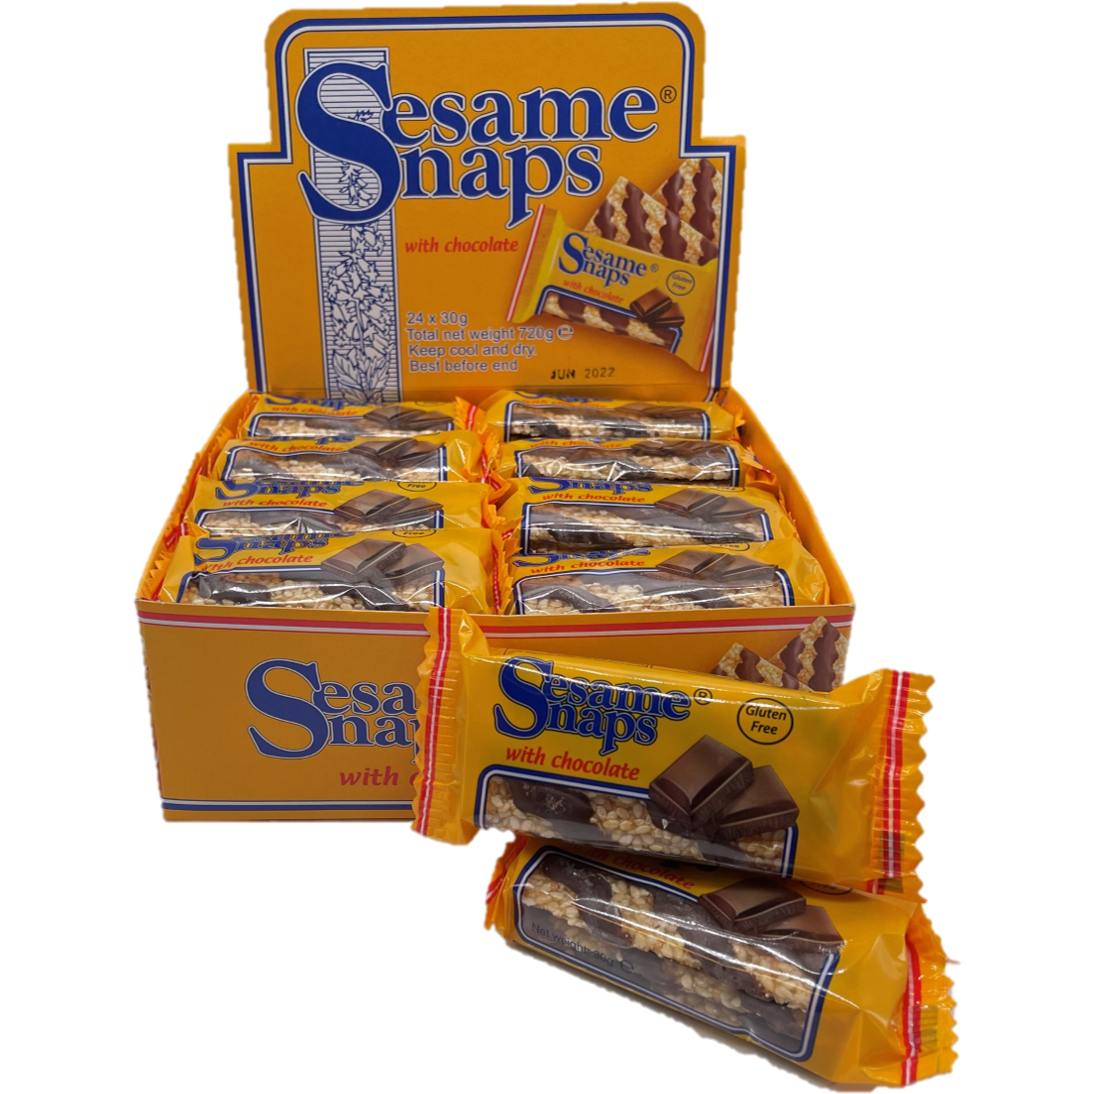 ANGLO DAL Chocolate Covered Sesame Snaps     Size - 24x30g